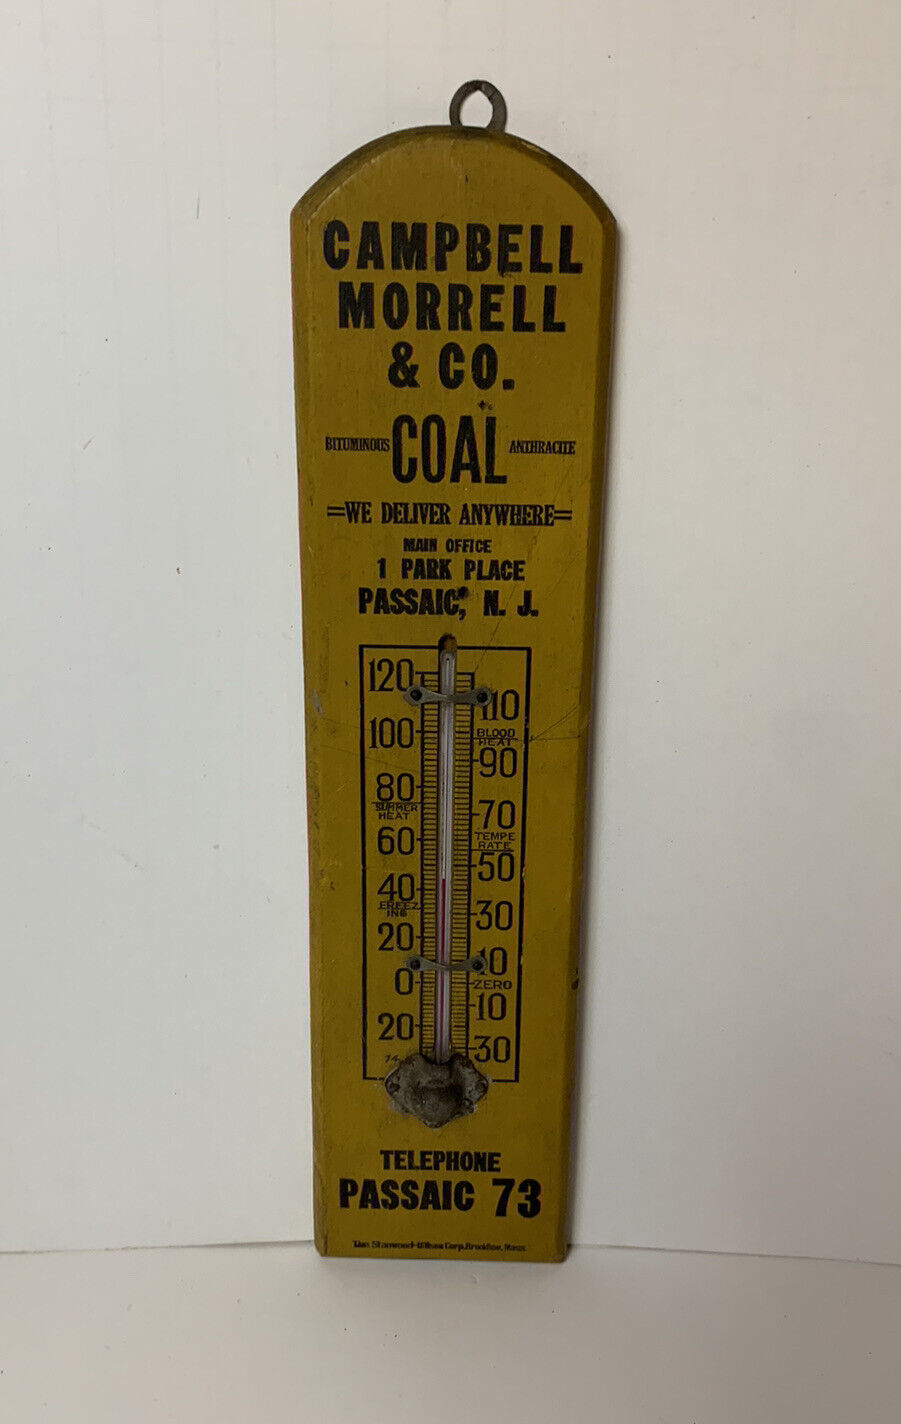 Vintage CAMPBELL MORRELL & CO. COAL PASSAIC N.J. Advertising Thermometer Sign